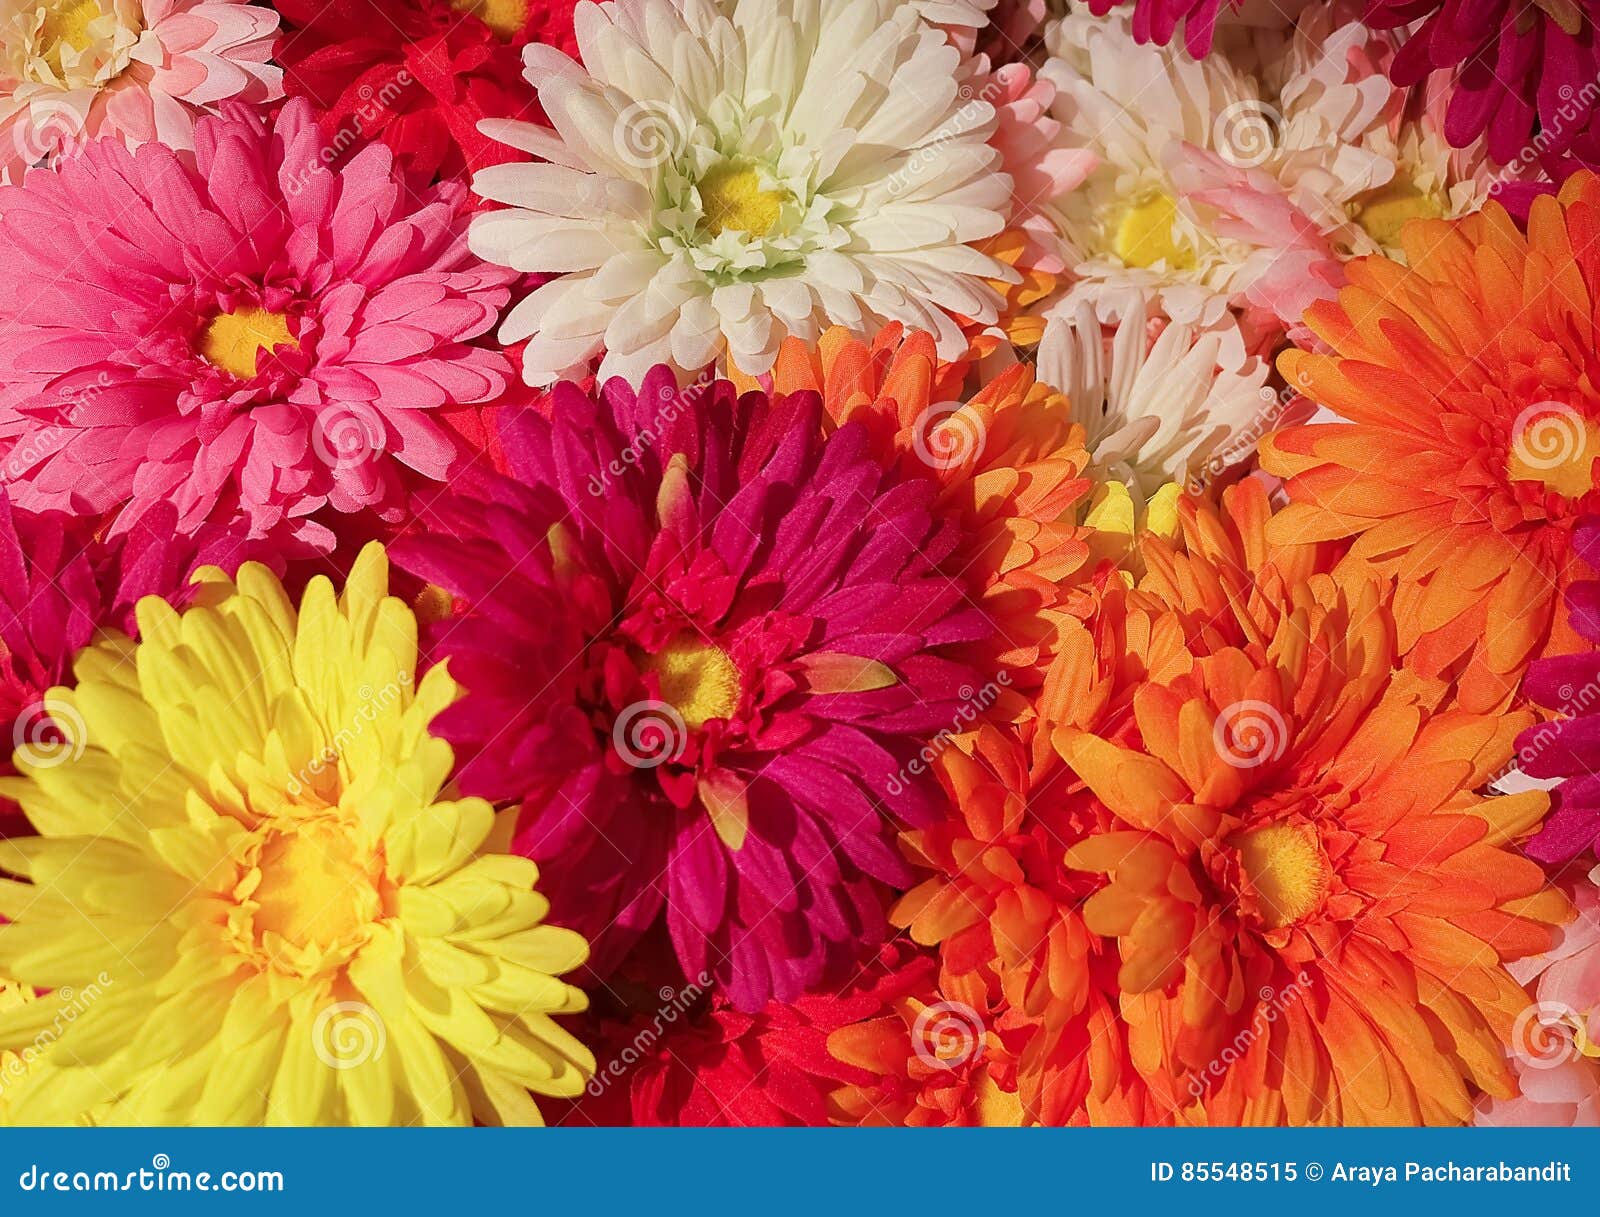 https://thumbs.dreamstime.com/z/close-up-colorful-artificial-daisy-flowers-background-pink-yellow-orange-white-chrysanthemum-home-building-85548515.jpg